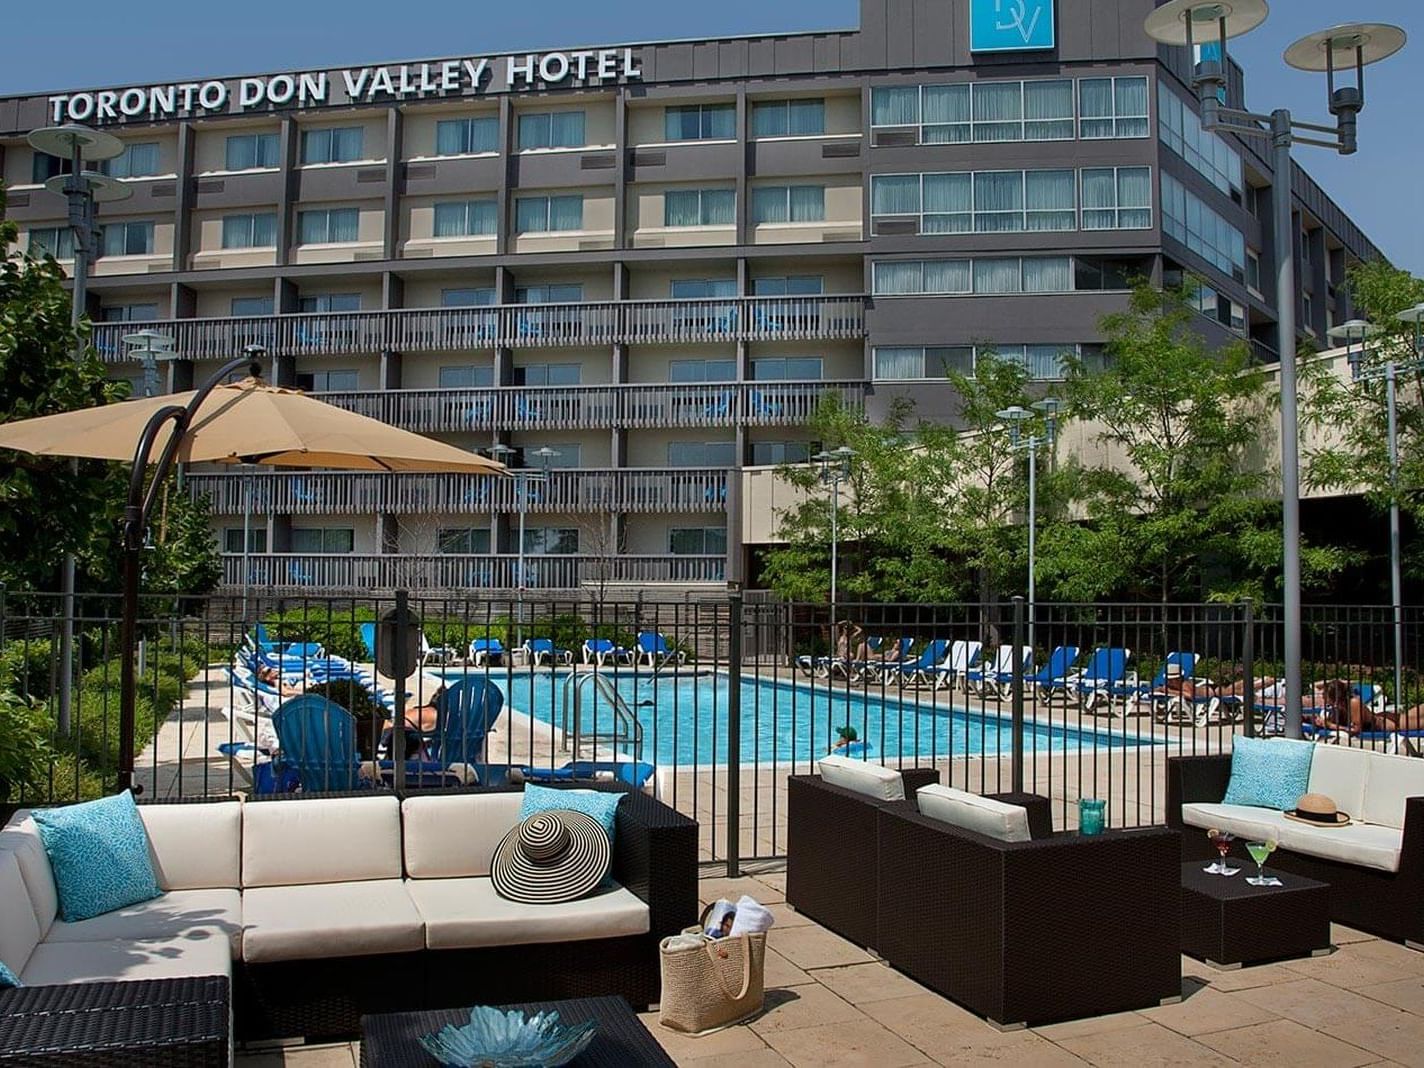 Outdoor pool at hotel in Toronto, ON